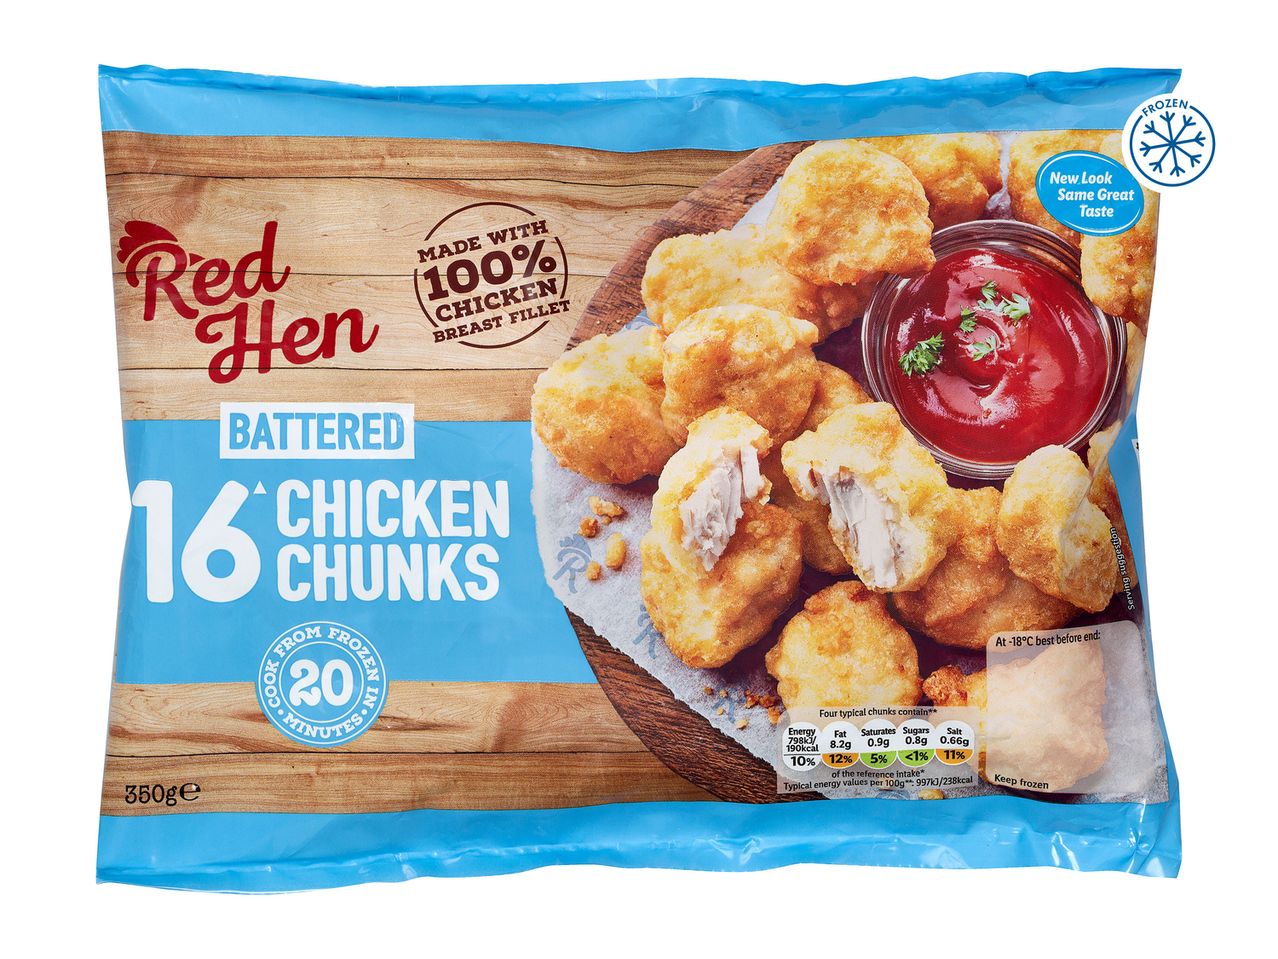 Go to full screen view: Red Hen Chicken Chunks - Image 2